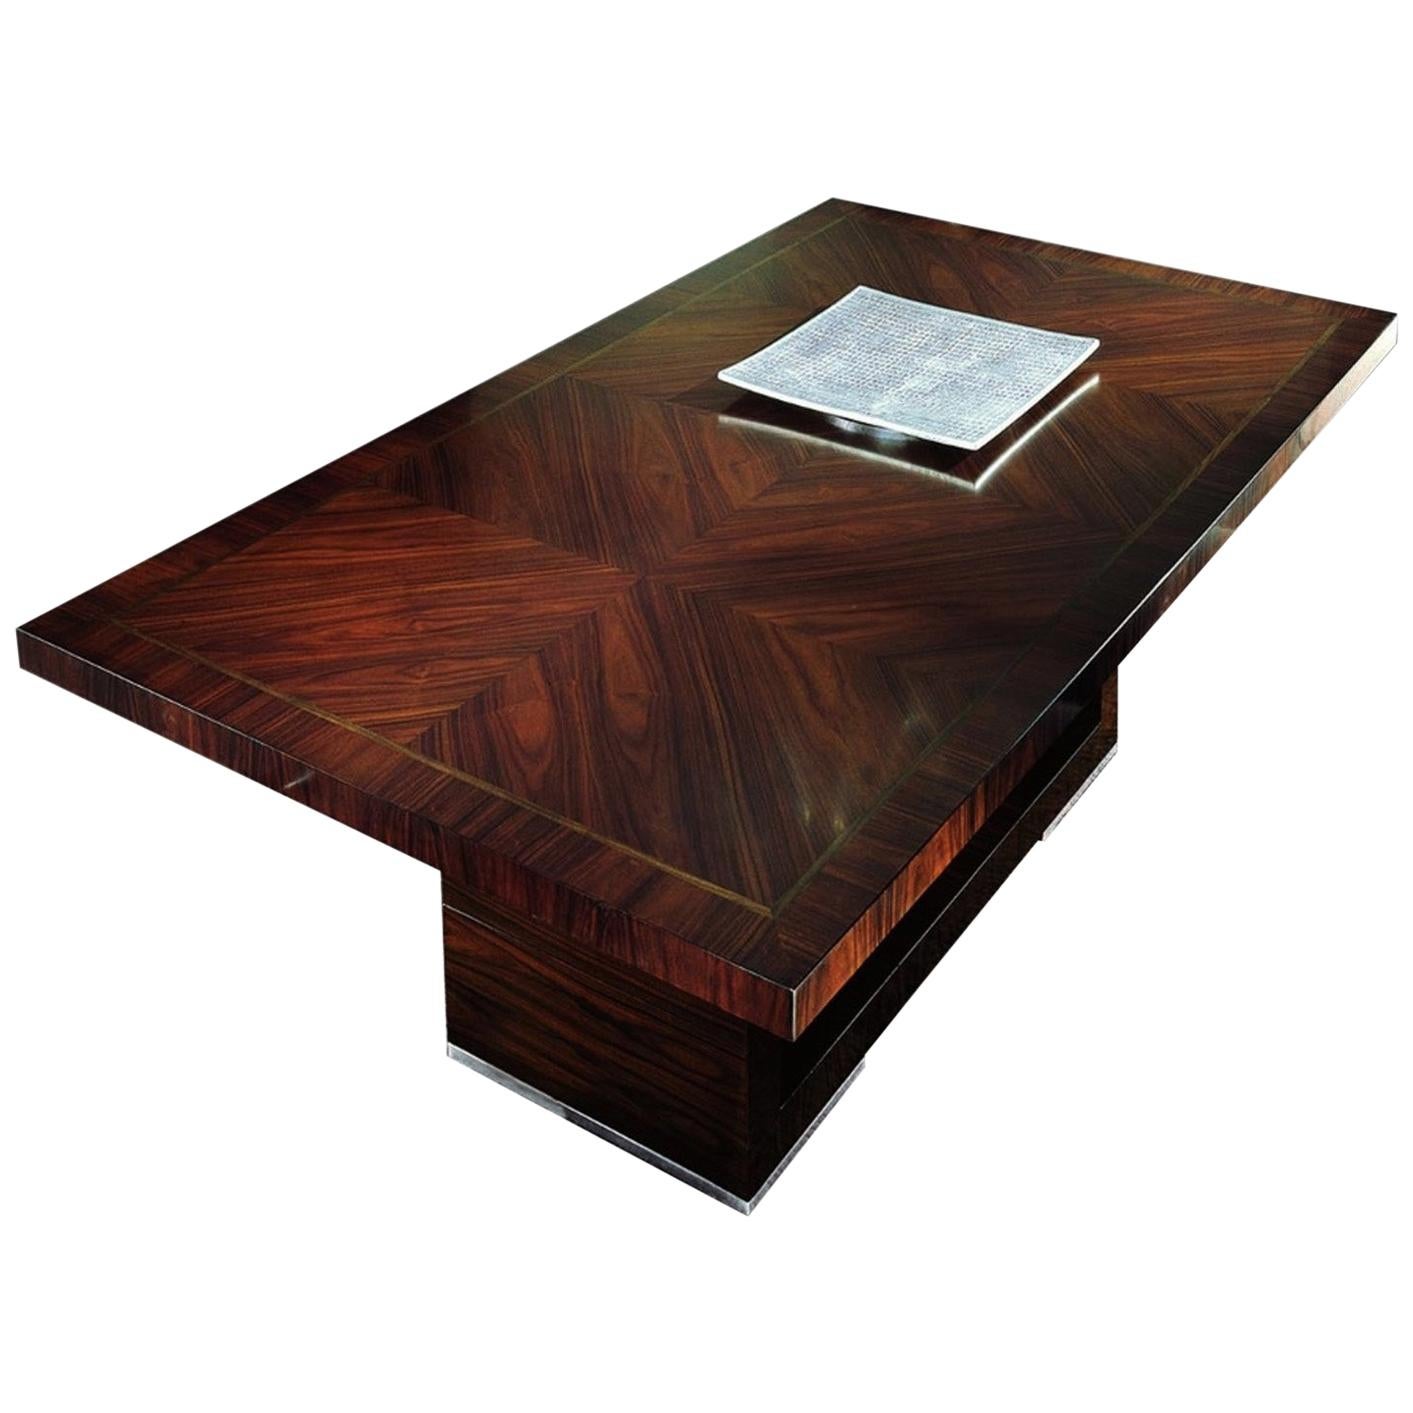 Rectangular table in Brazilian rosewood satin finish with Italian walnut inlay top with 2 extension of cm. 48 (19”) each.
Brushed steel accents on the base.
Art Deco 

Size 78’’ ½ W x 46’’ D x 30’’ H (closed)
Size 116’’ ½ W x 46’’ D x 30’’ H